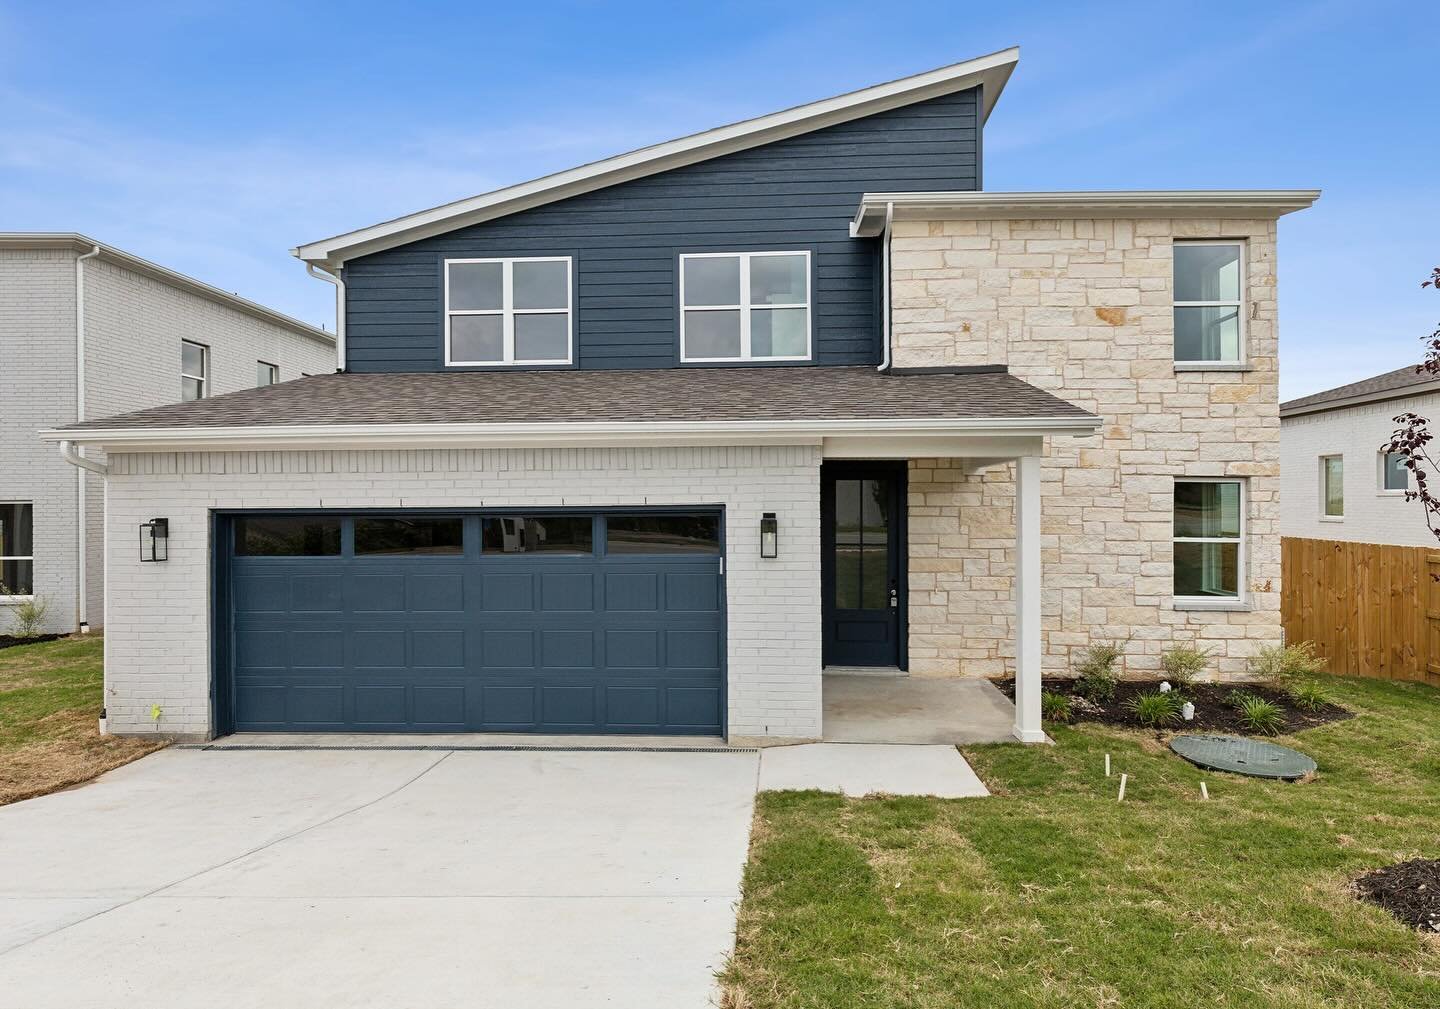 This modern contemporary style new construction from West River Homes is now available in the beautiful lakefront community of Lake Country Estates! 

7620 Trailridge Drive | Fort Worth, Texas 76179
3 Bed | 2.5 Bath | 2,763 SF | $594,000 

Whether en